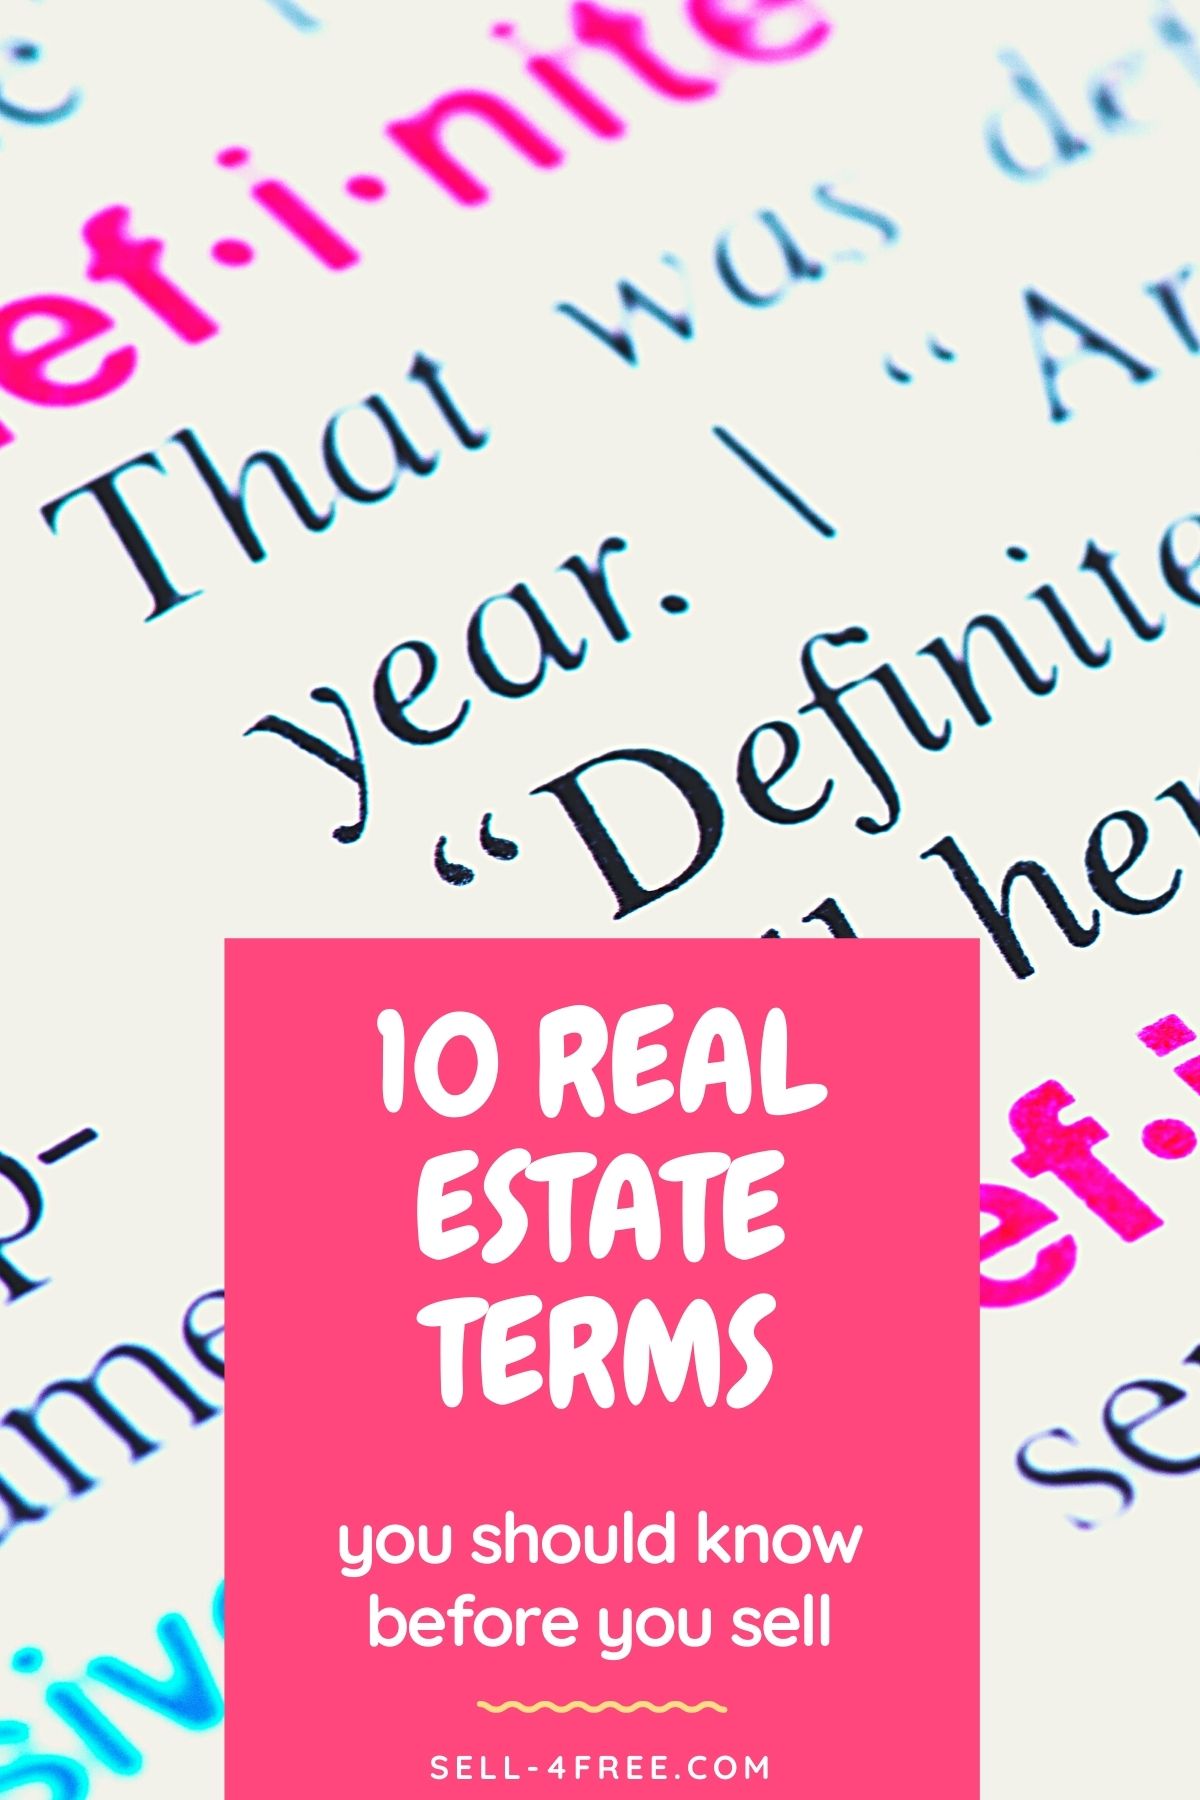 10 Real Estate Terms You Should Know Before You Sell Your Home